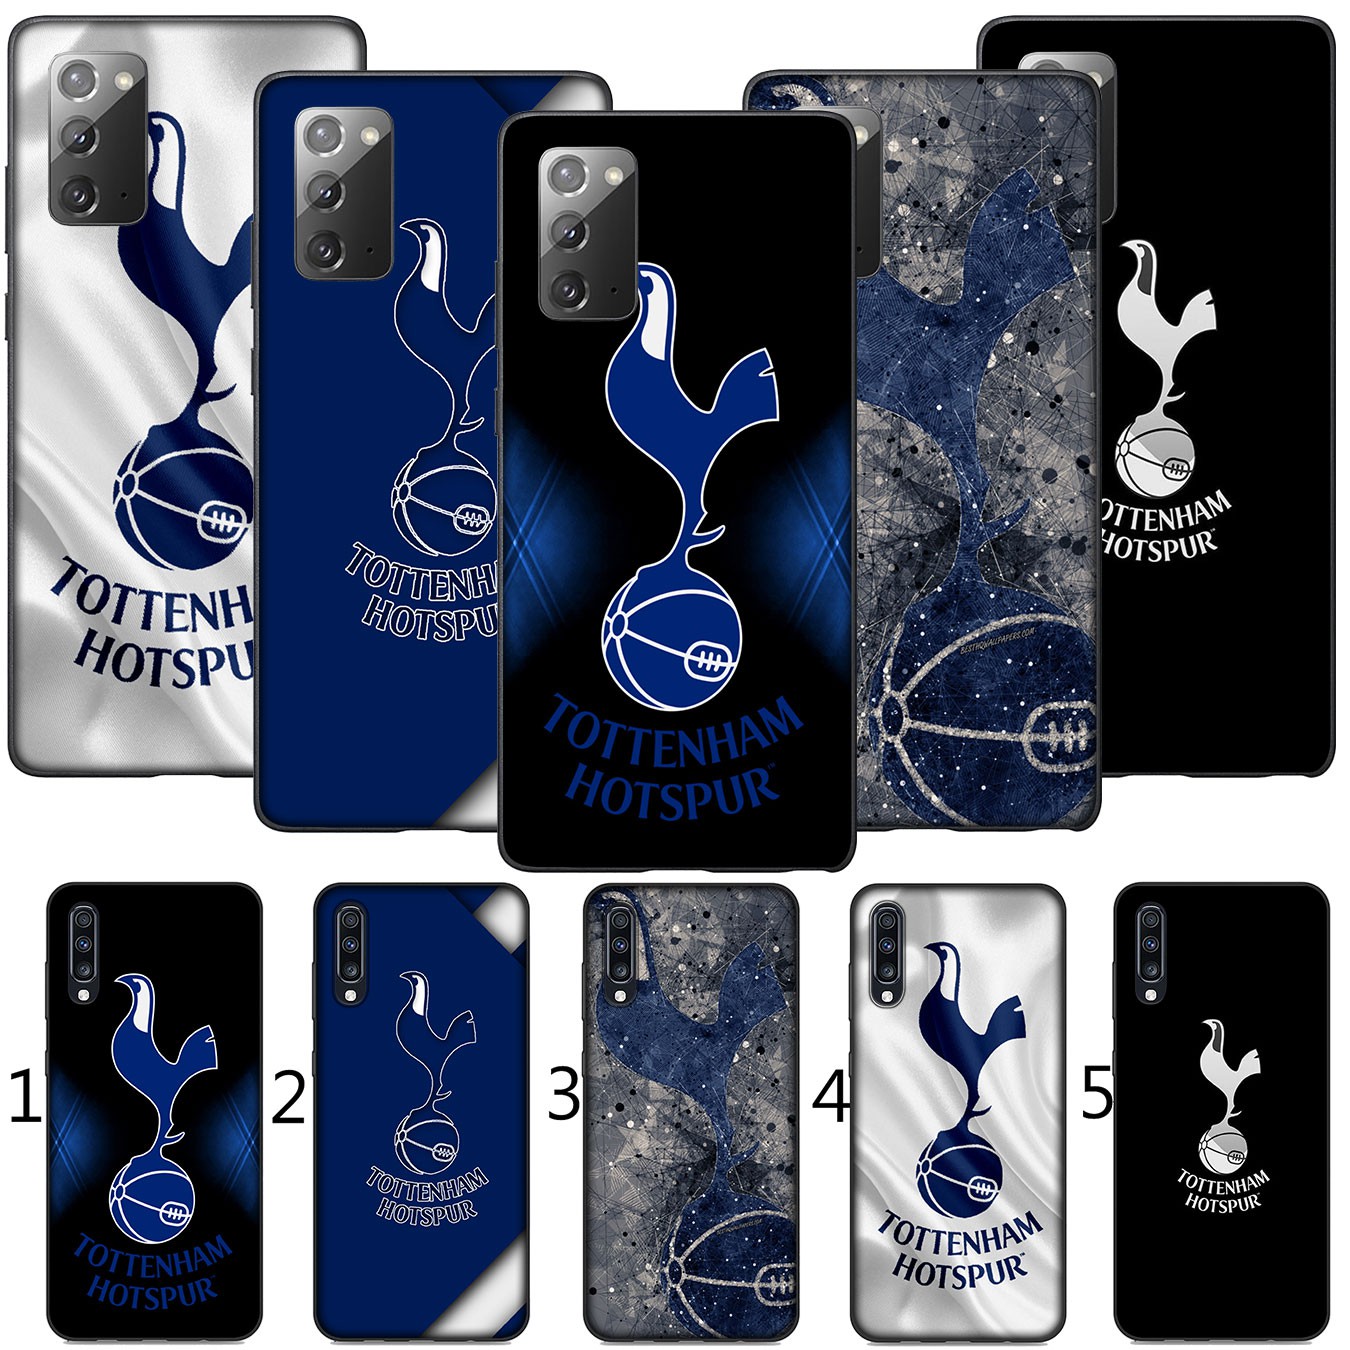 Samsung Galaxy Note 20 Ultra Note 10 Plus  Lite 8 9 S7 Edge M11 Casing Soft Silicone Phone Case Tottenham Hotspur Football Cover